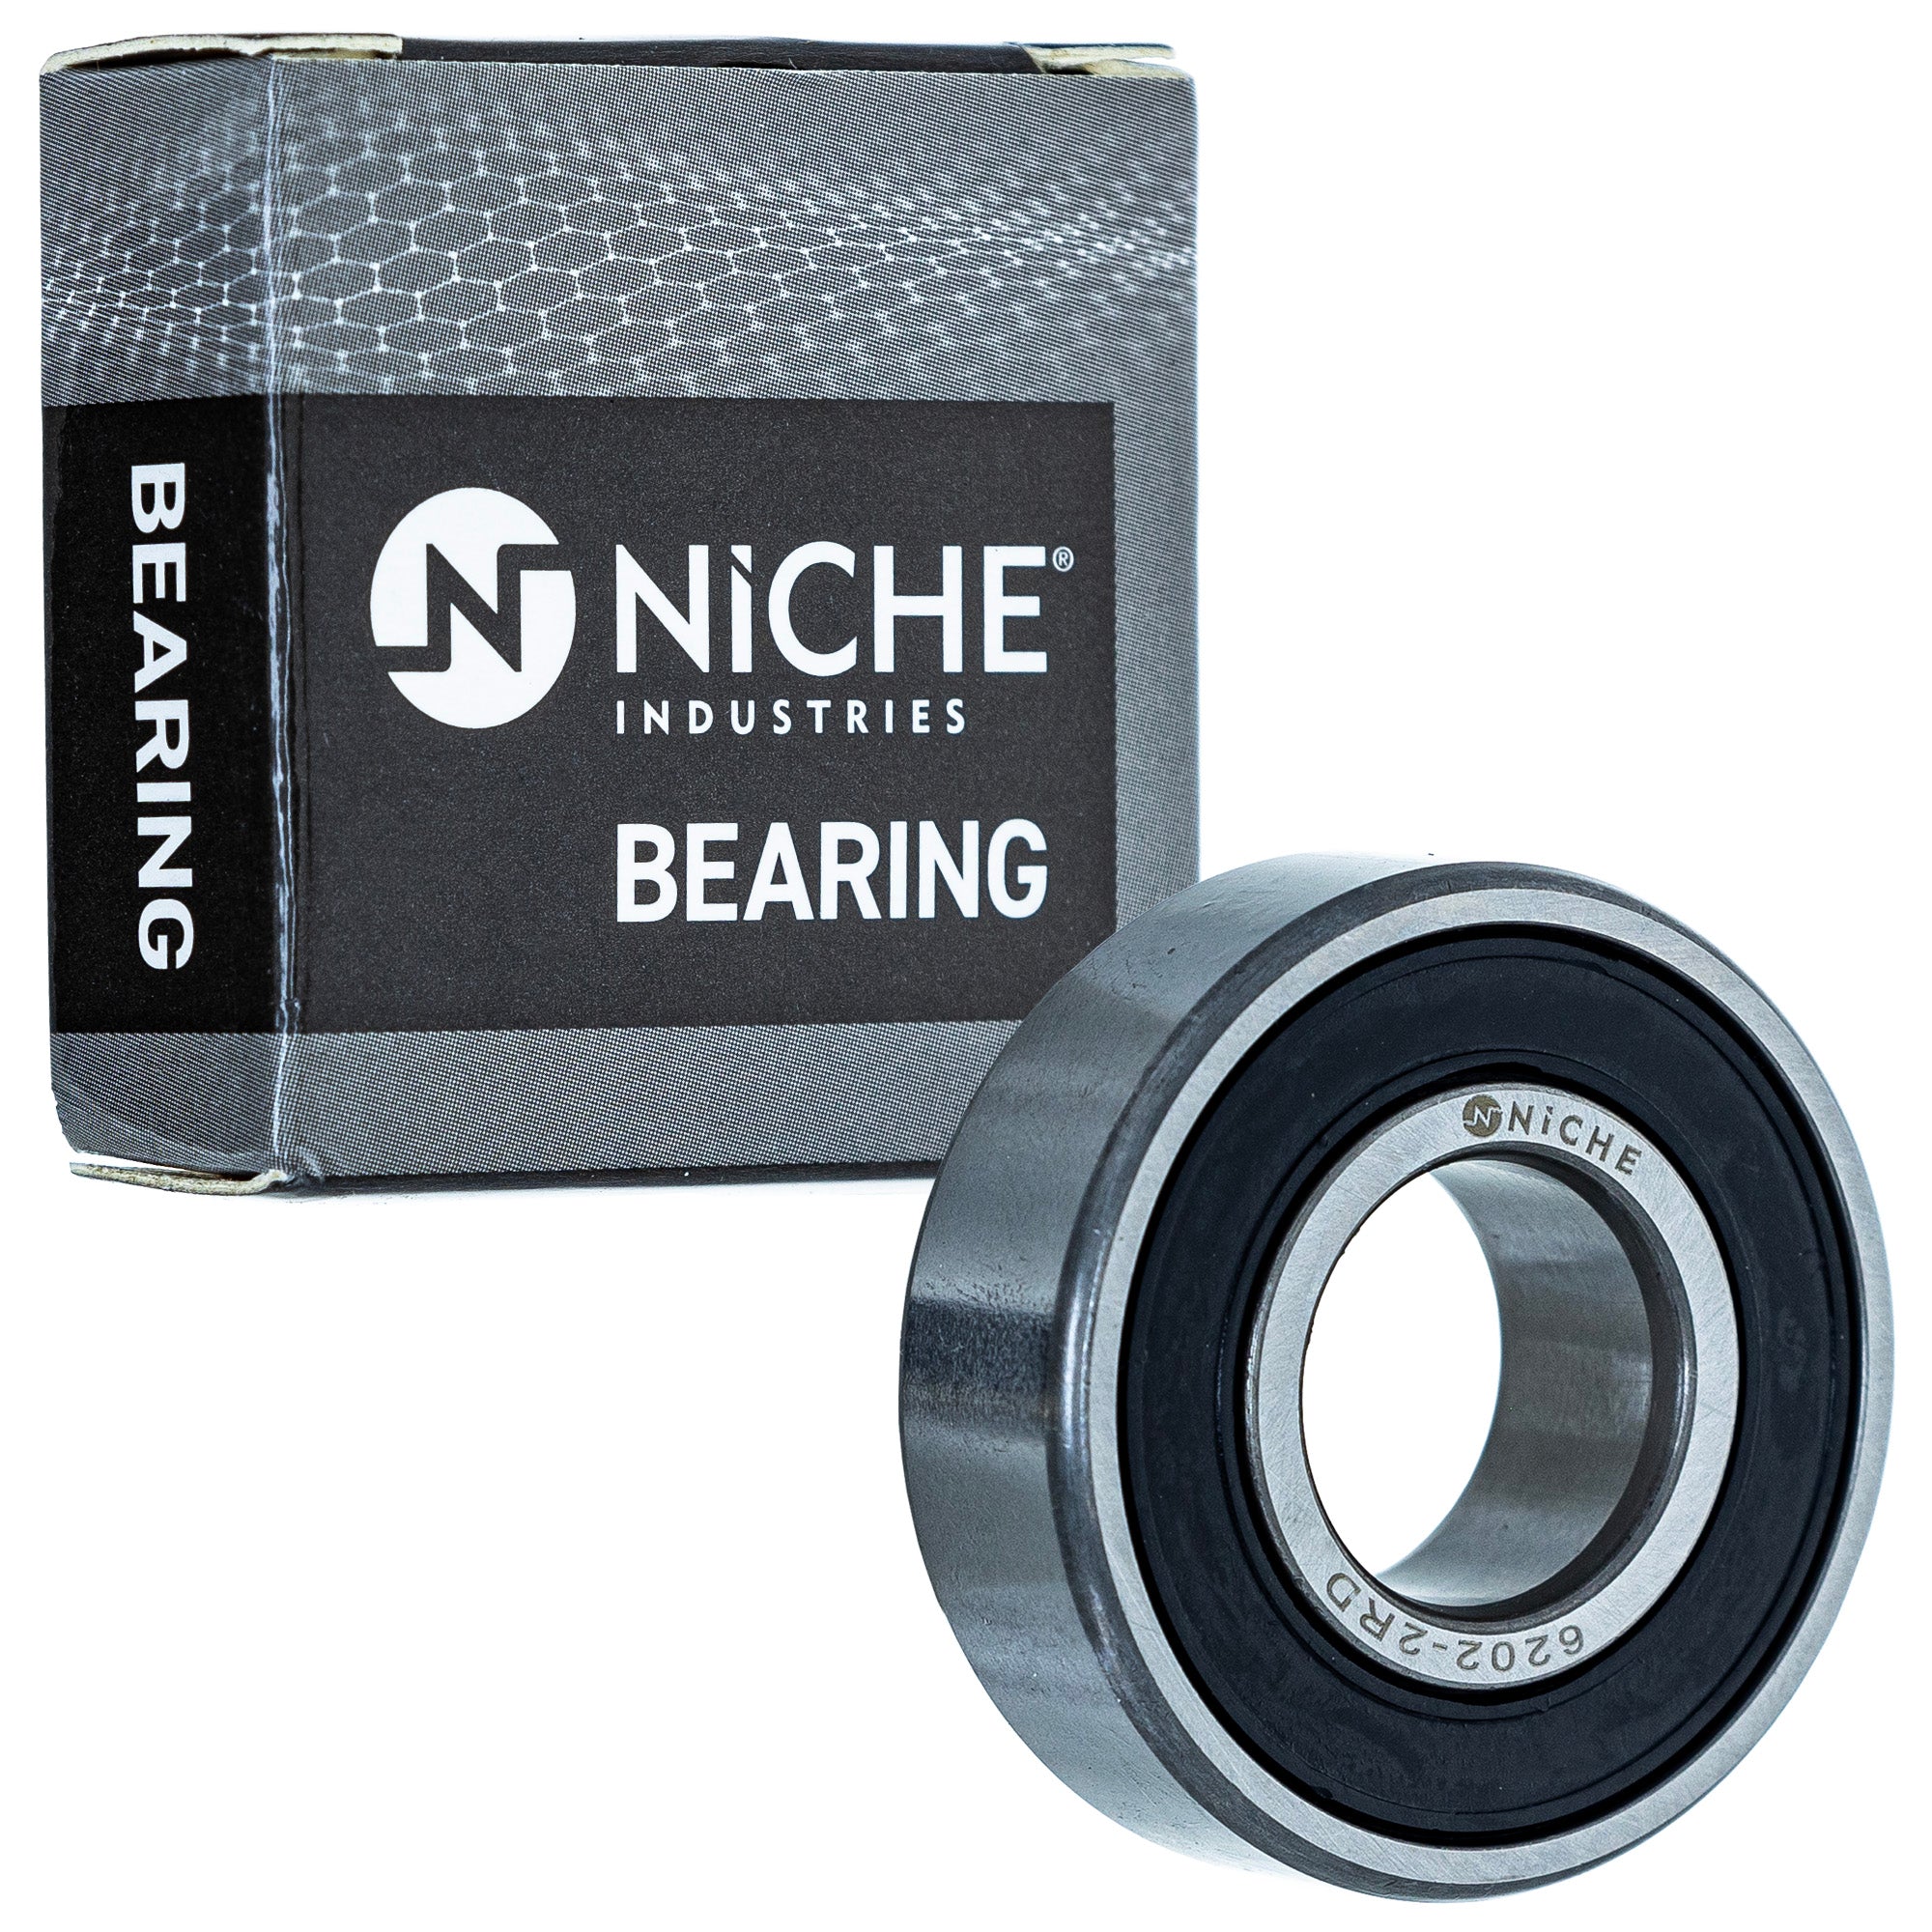 NICHE 519-CBB2252R Bearing for zOTHER Xpress Xplorer Xpedition Worker